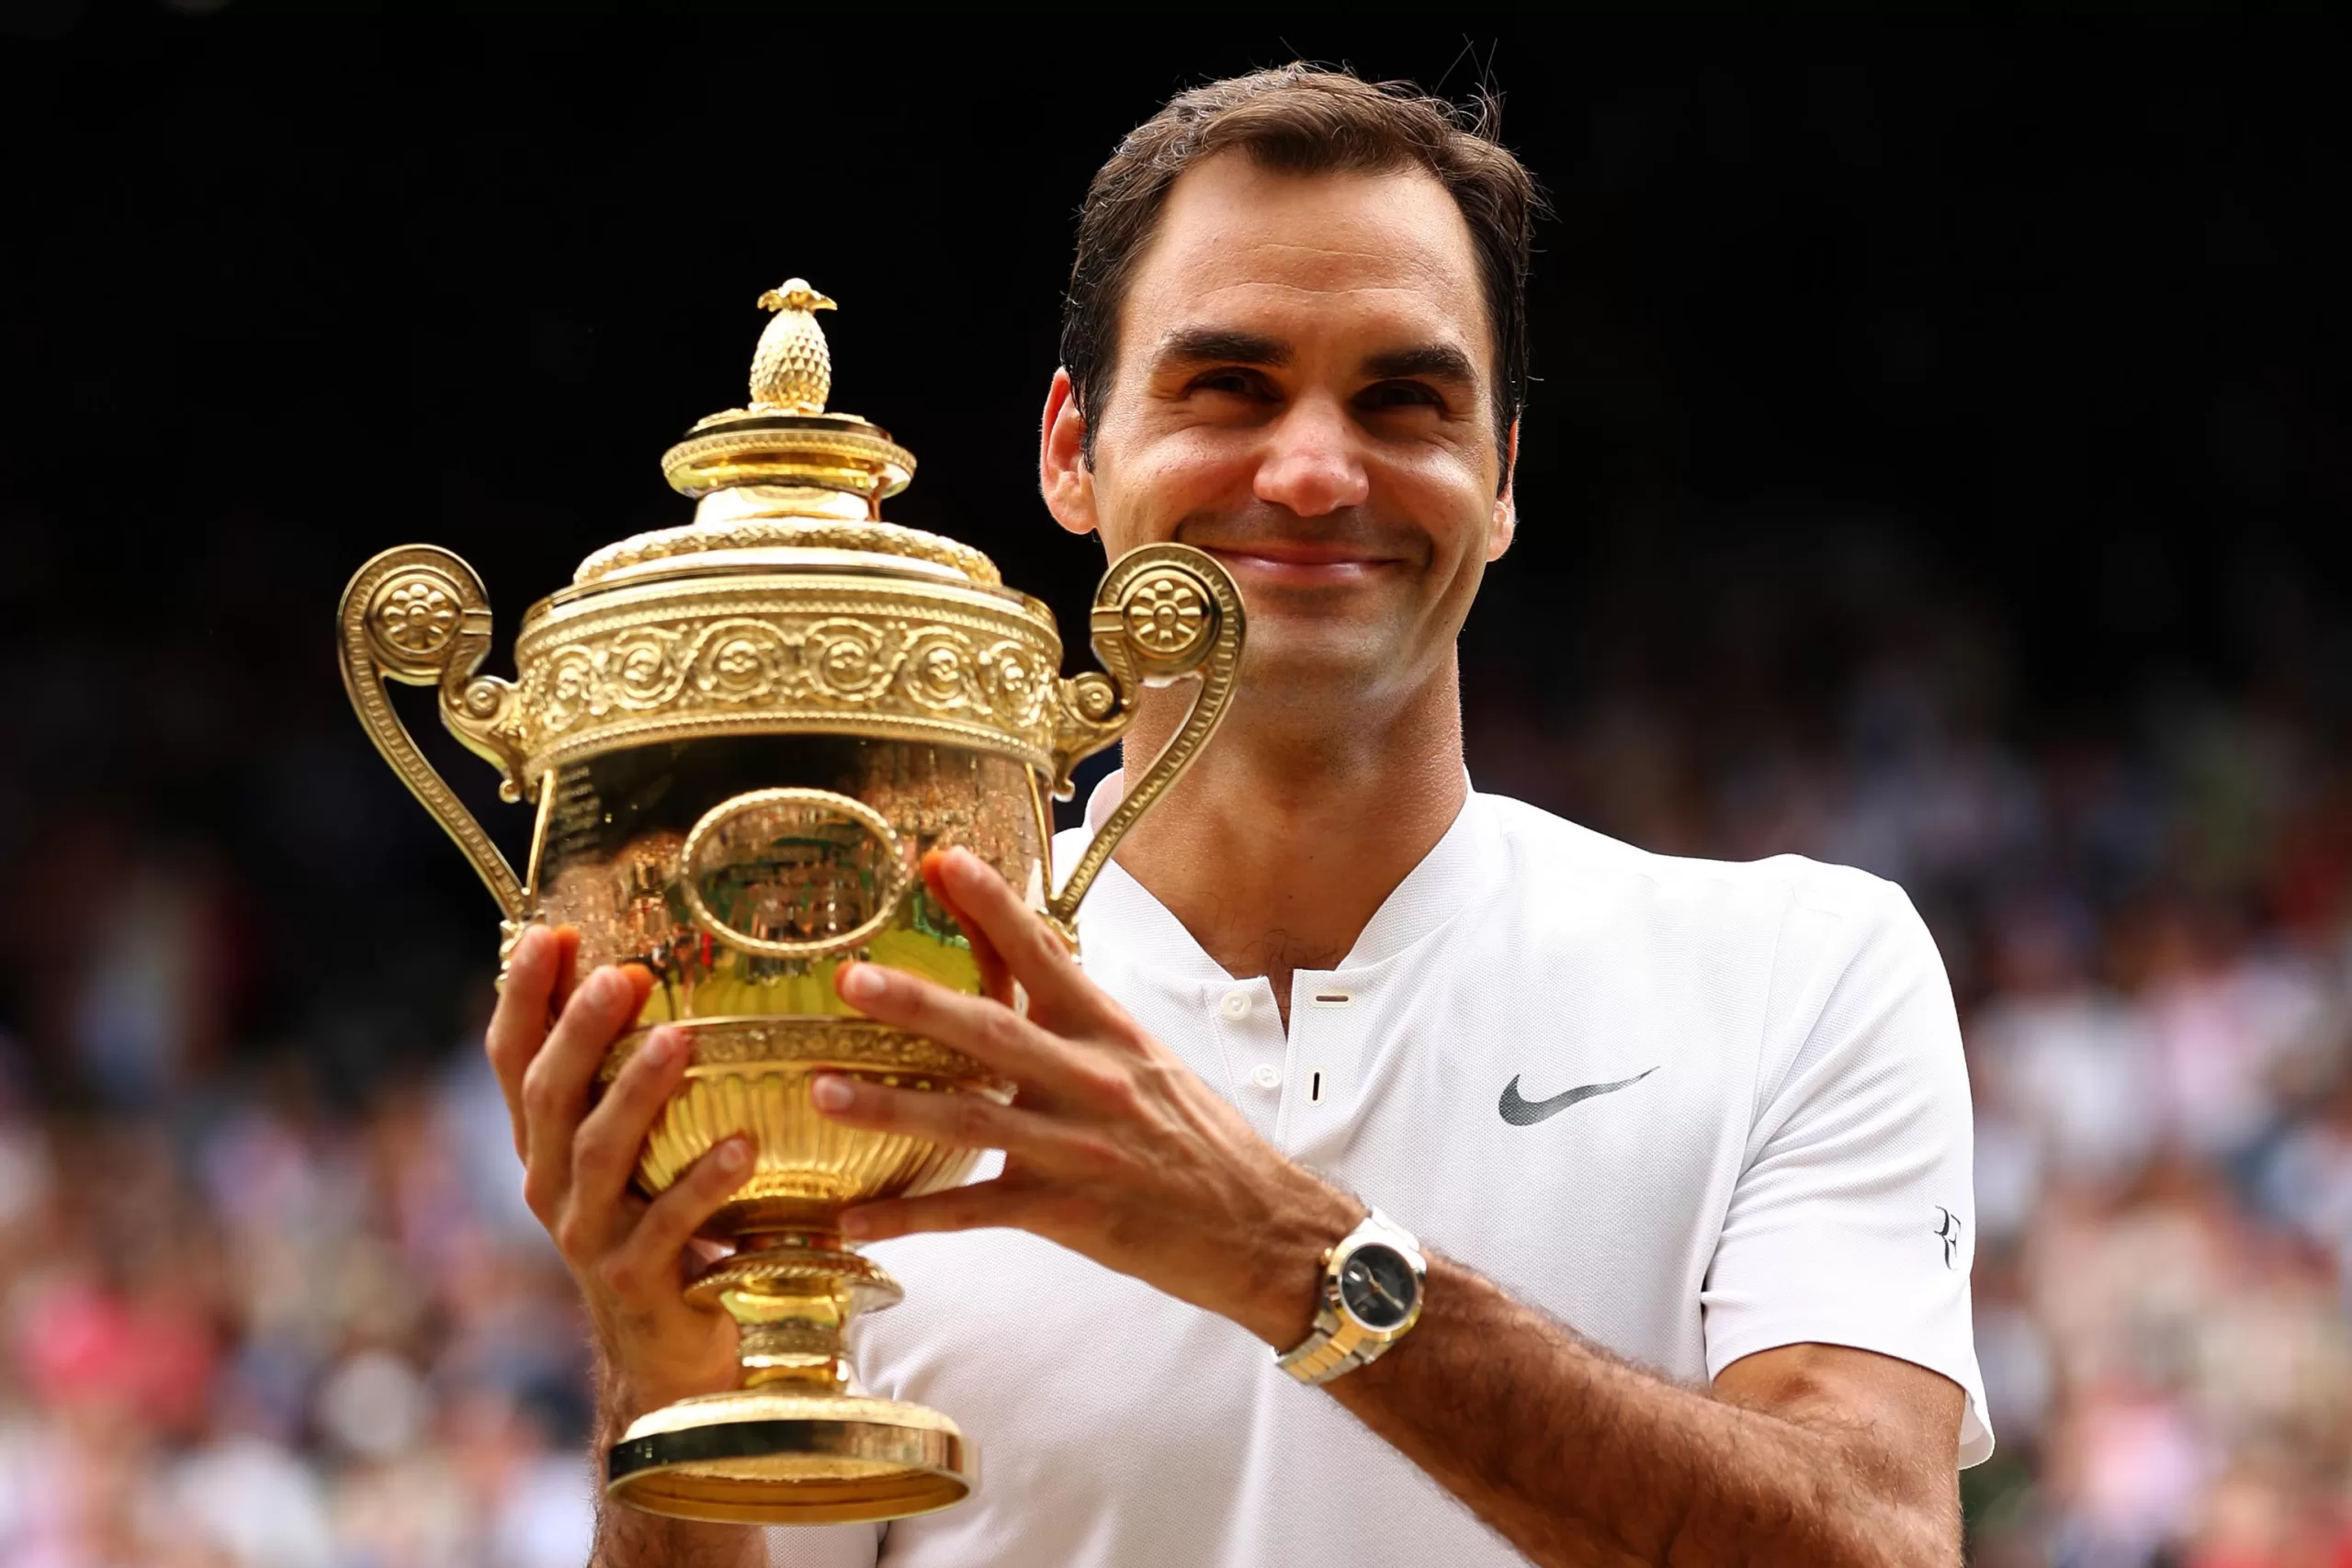 Roger Federer: Fun Facts and Winning Stats